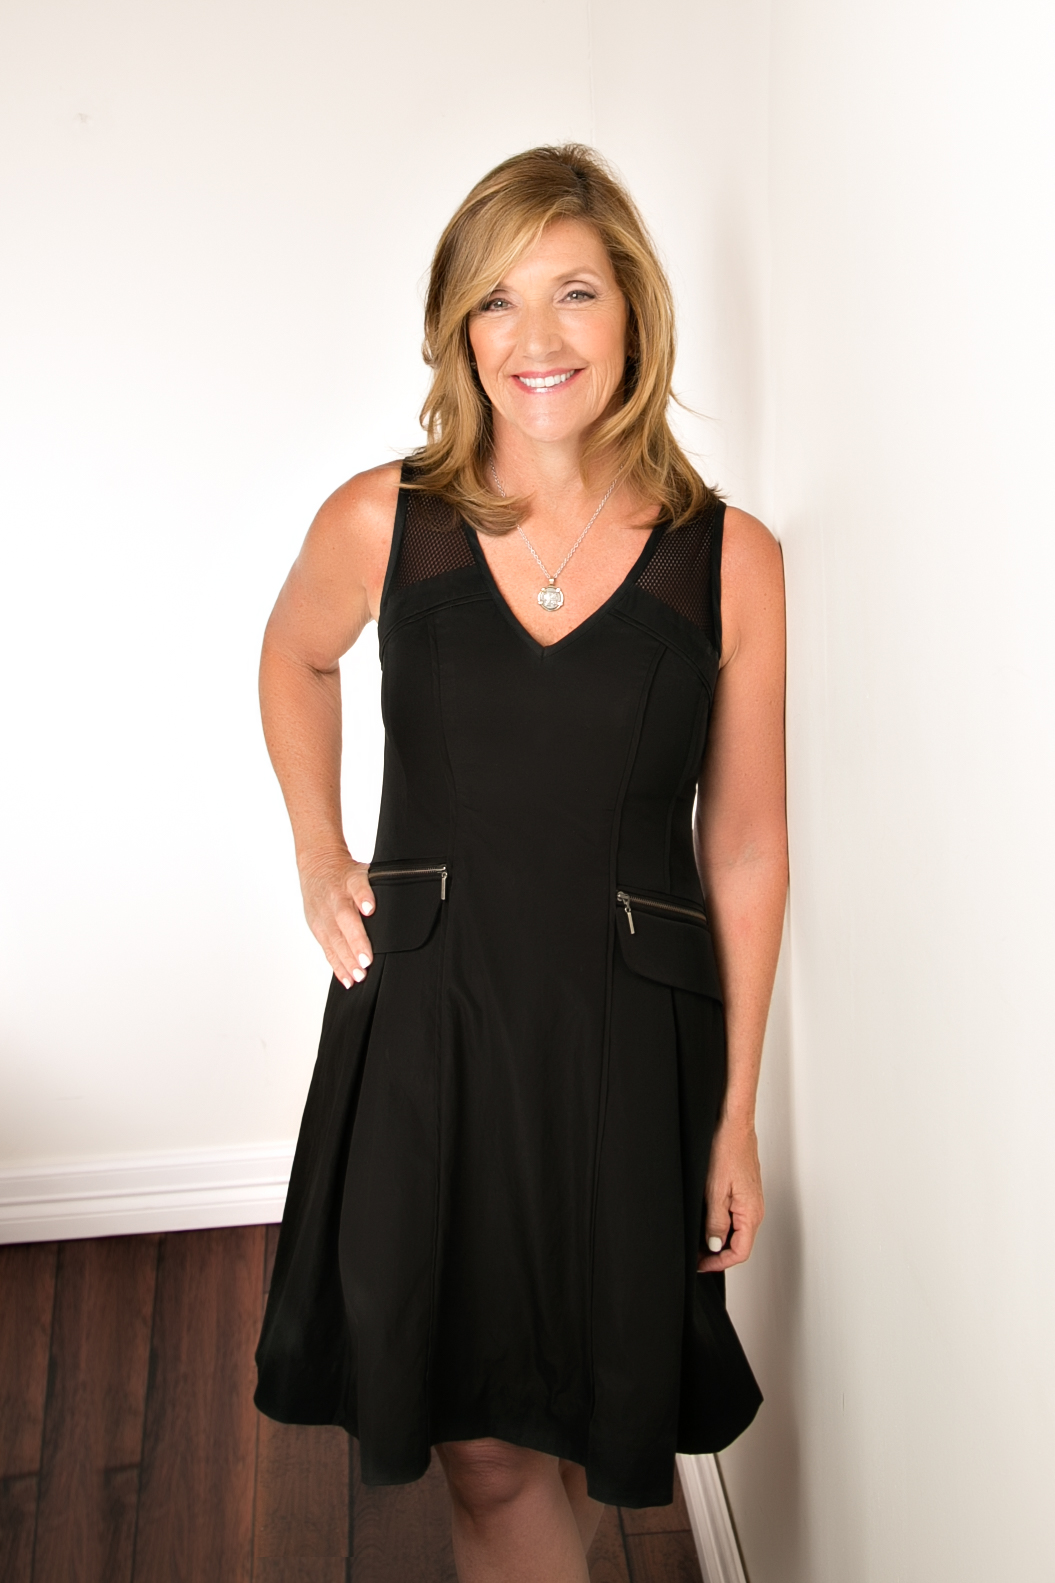 Q&A with Get Smart 2015 Keynote Speaker Amy Simmons, Founder & CEO of Amy’s Ice Creams